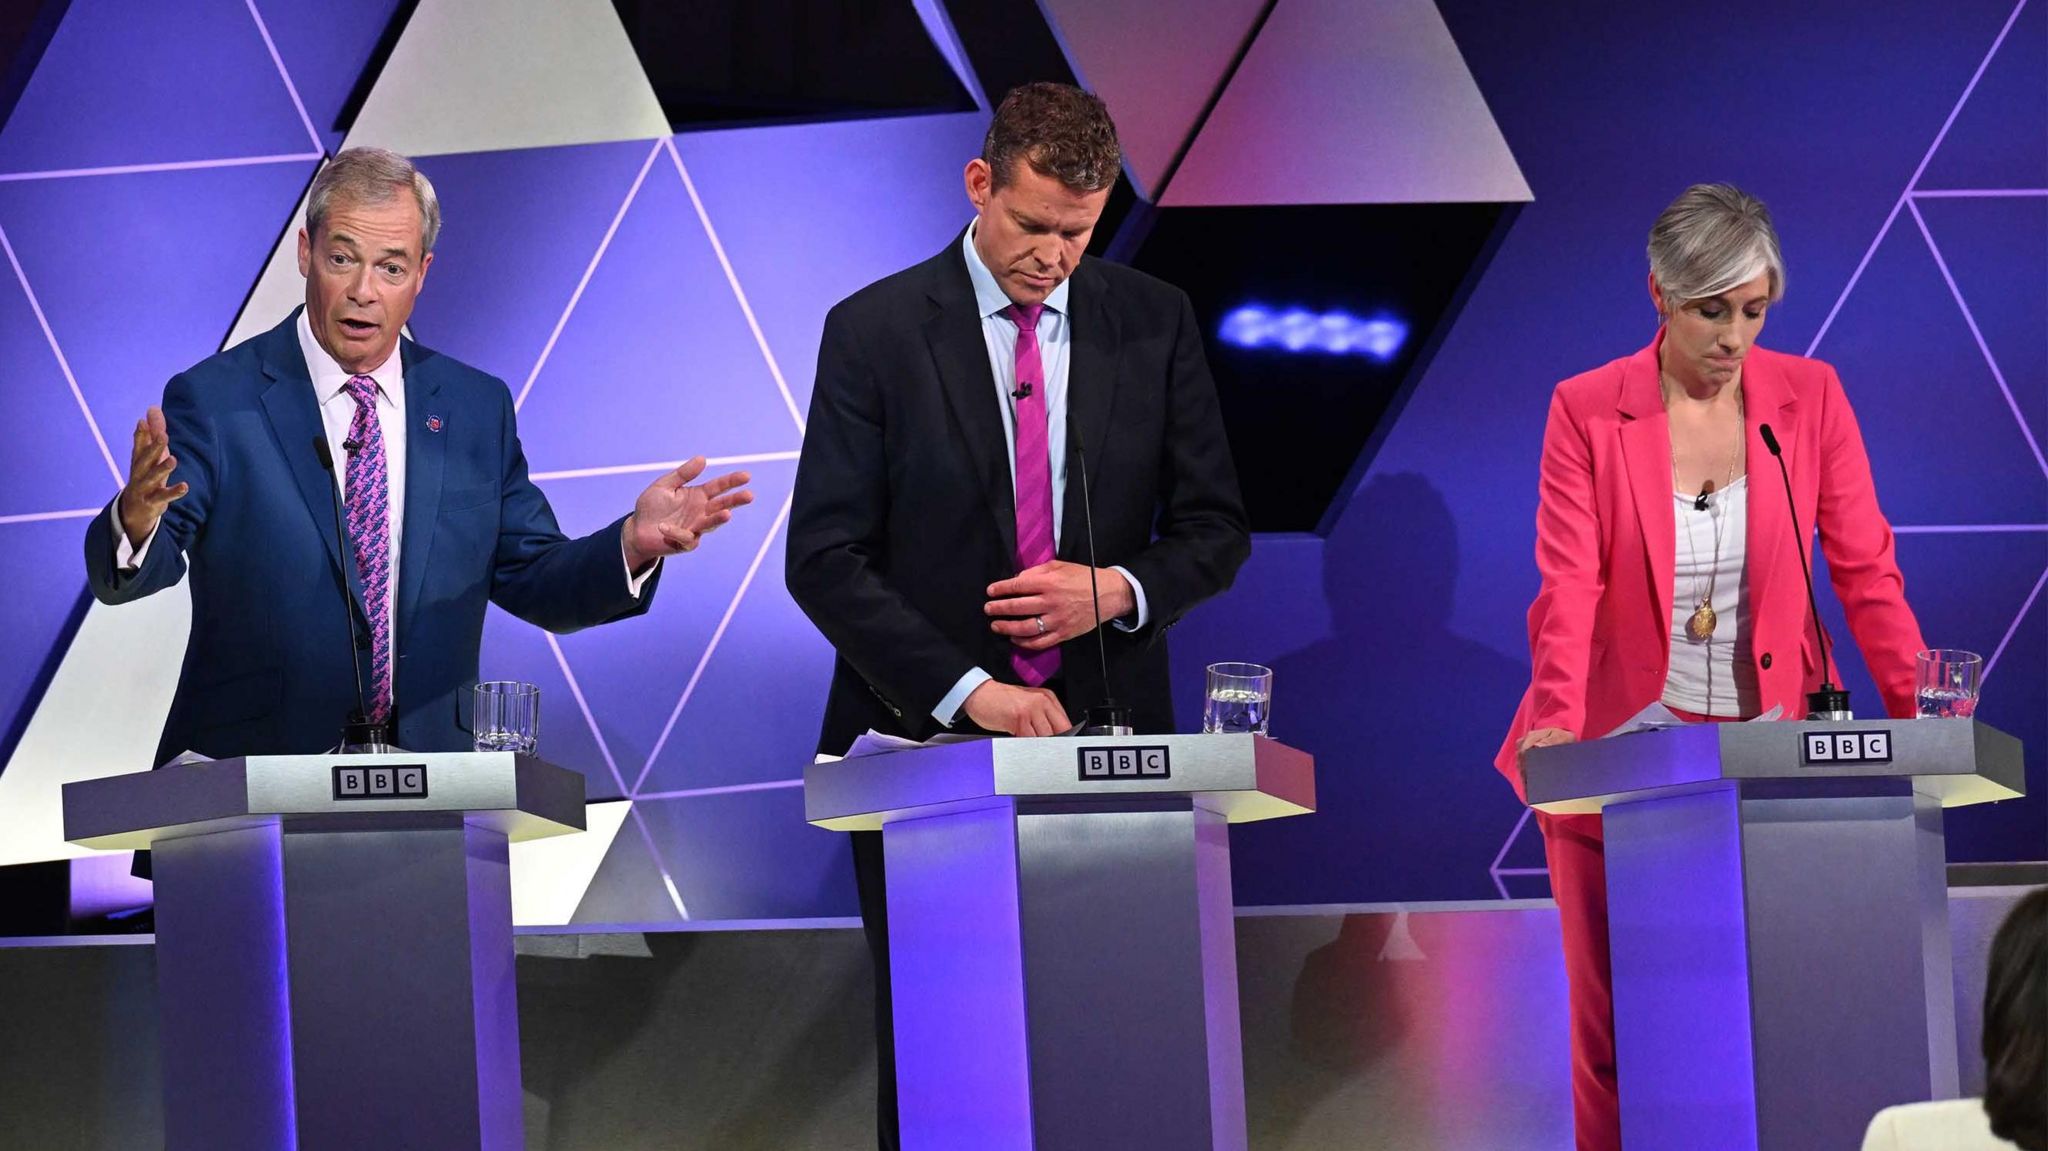 Picture of Nigel Farage, Rhun ap Iorweth and Daisy Cooper at the debate